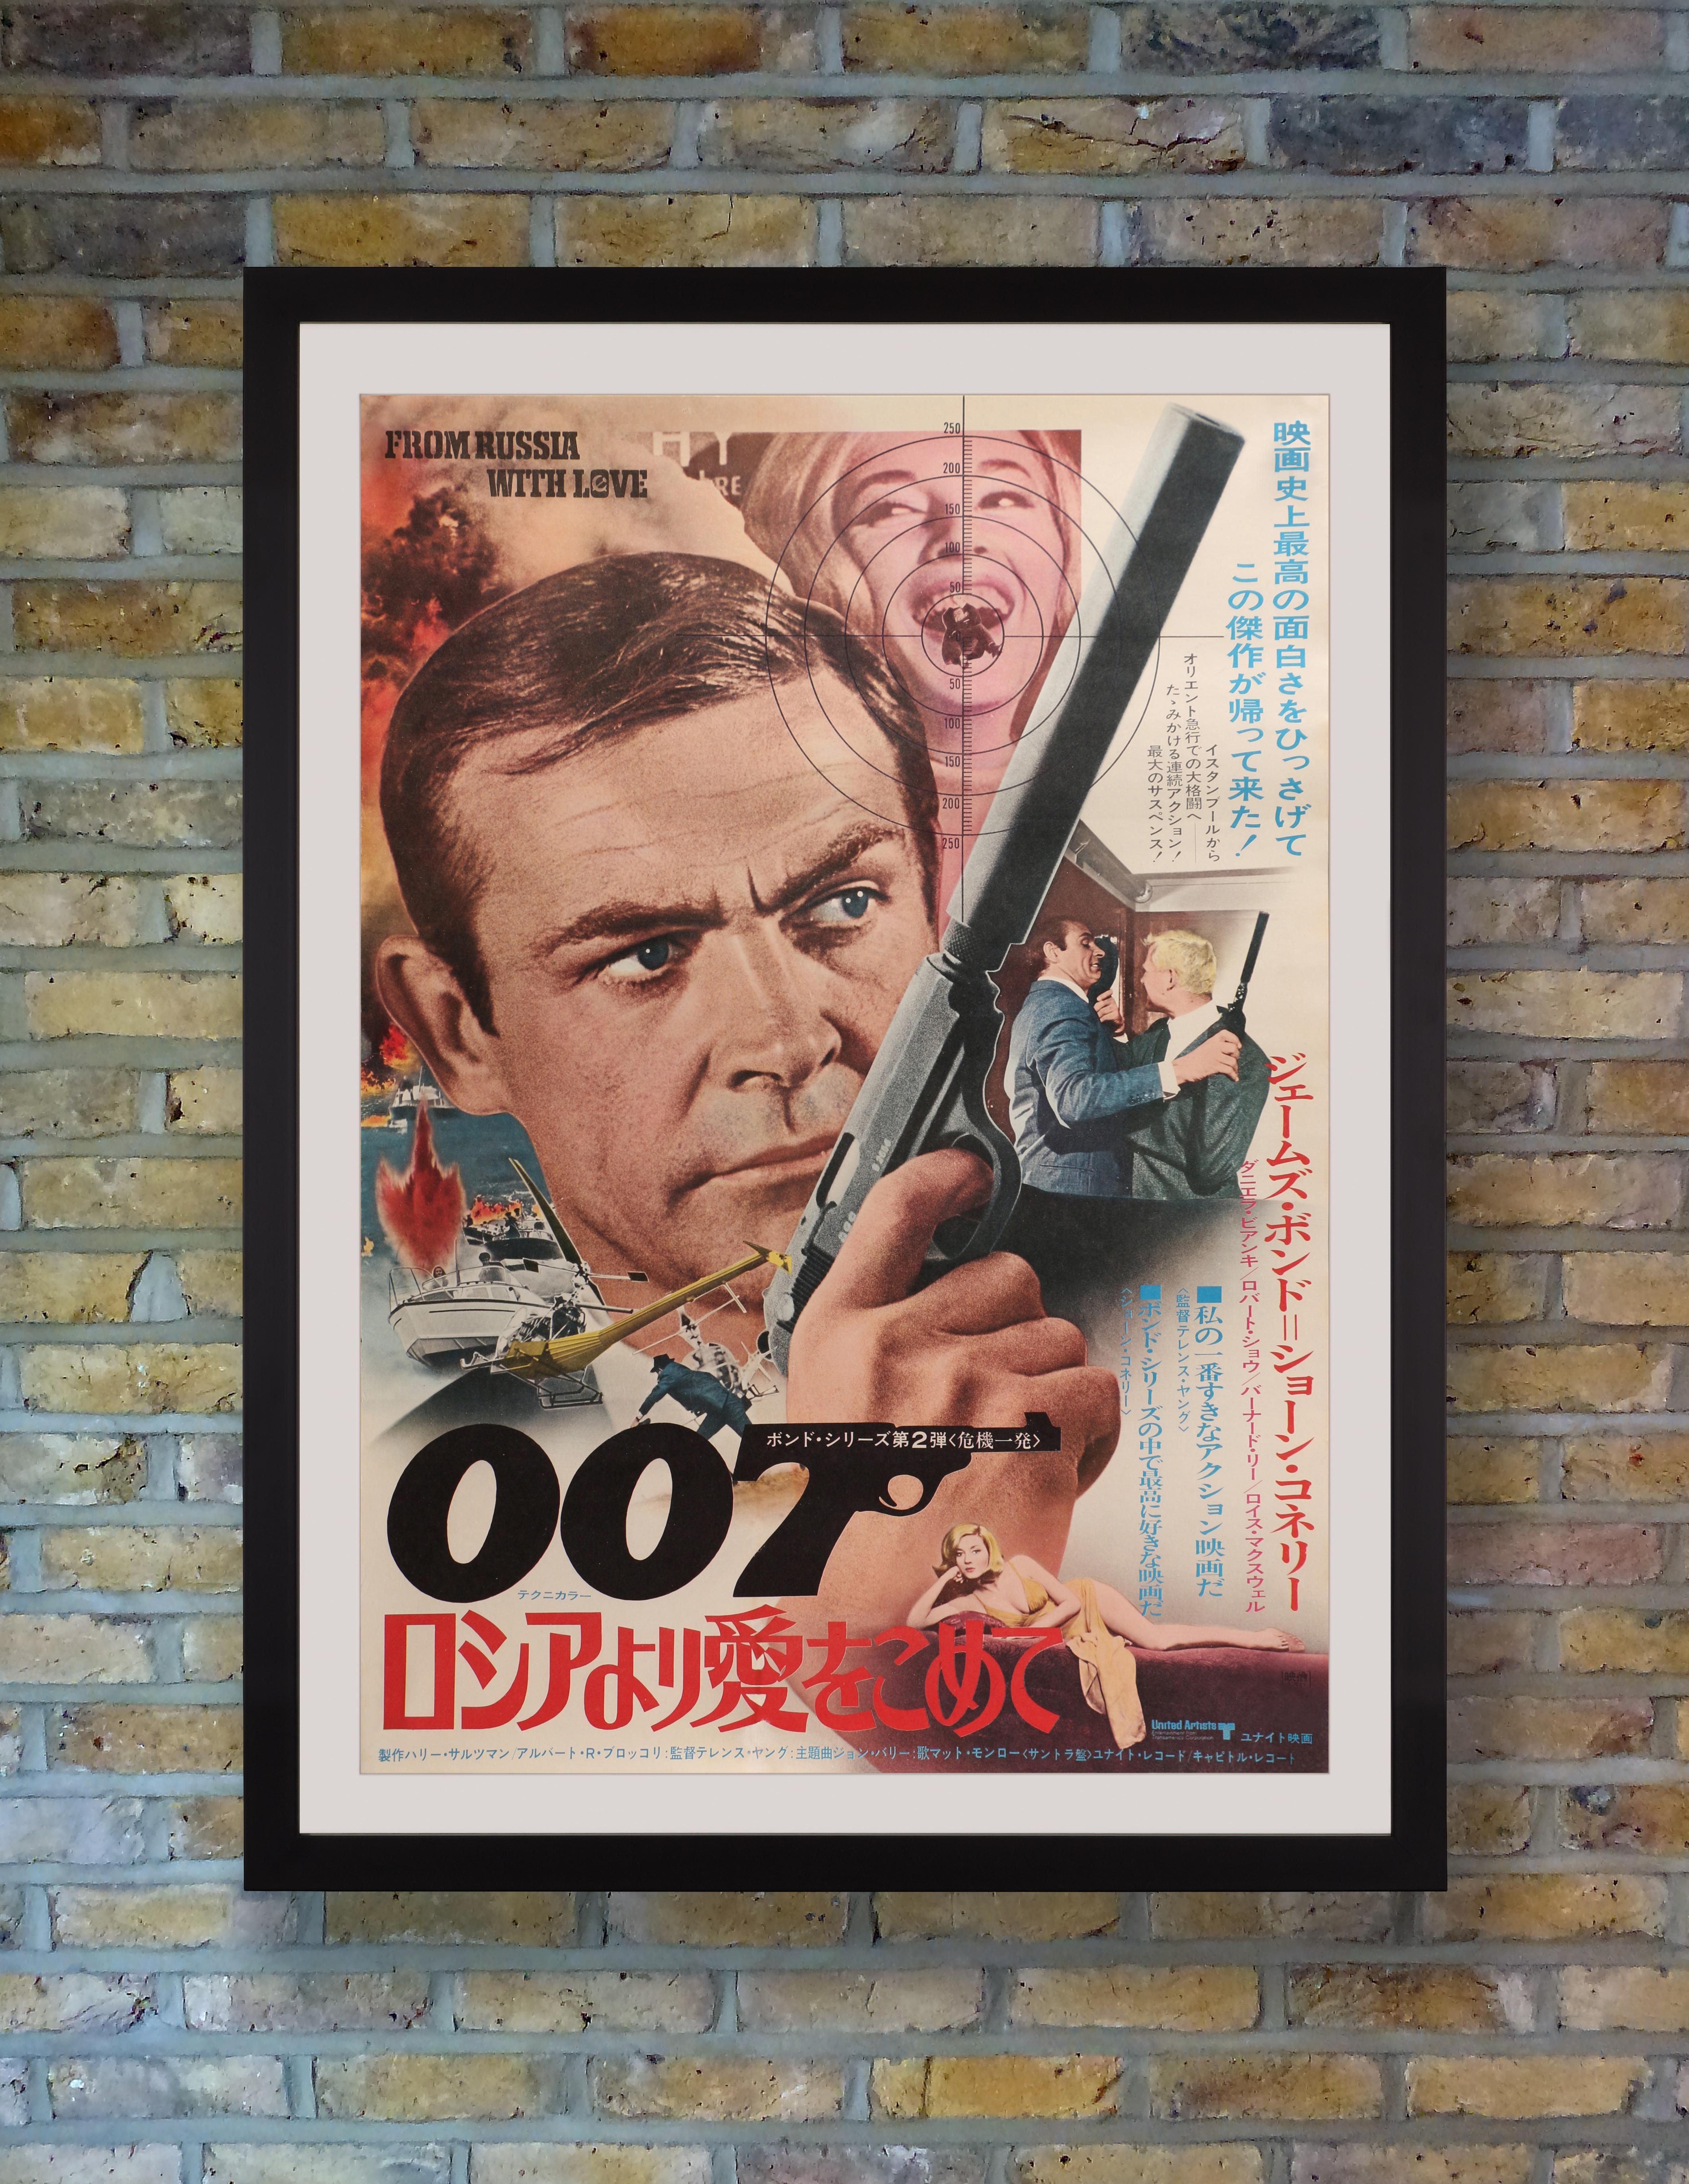 In Sean Connery's second outing as James Bond, 